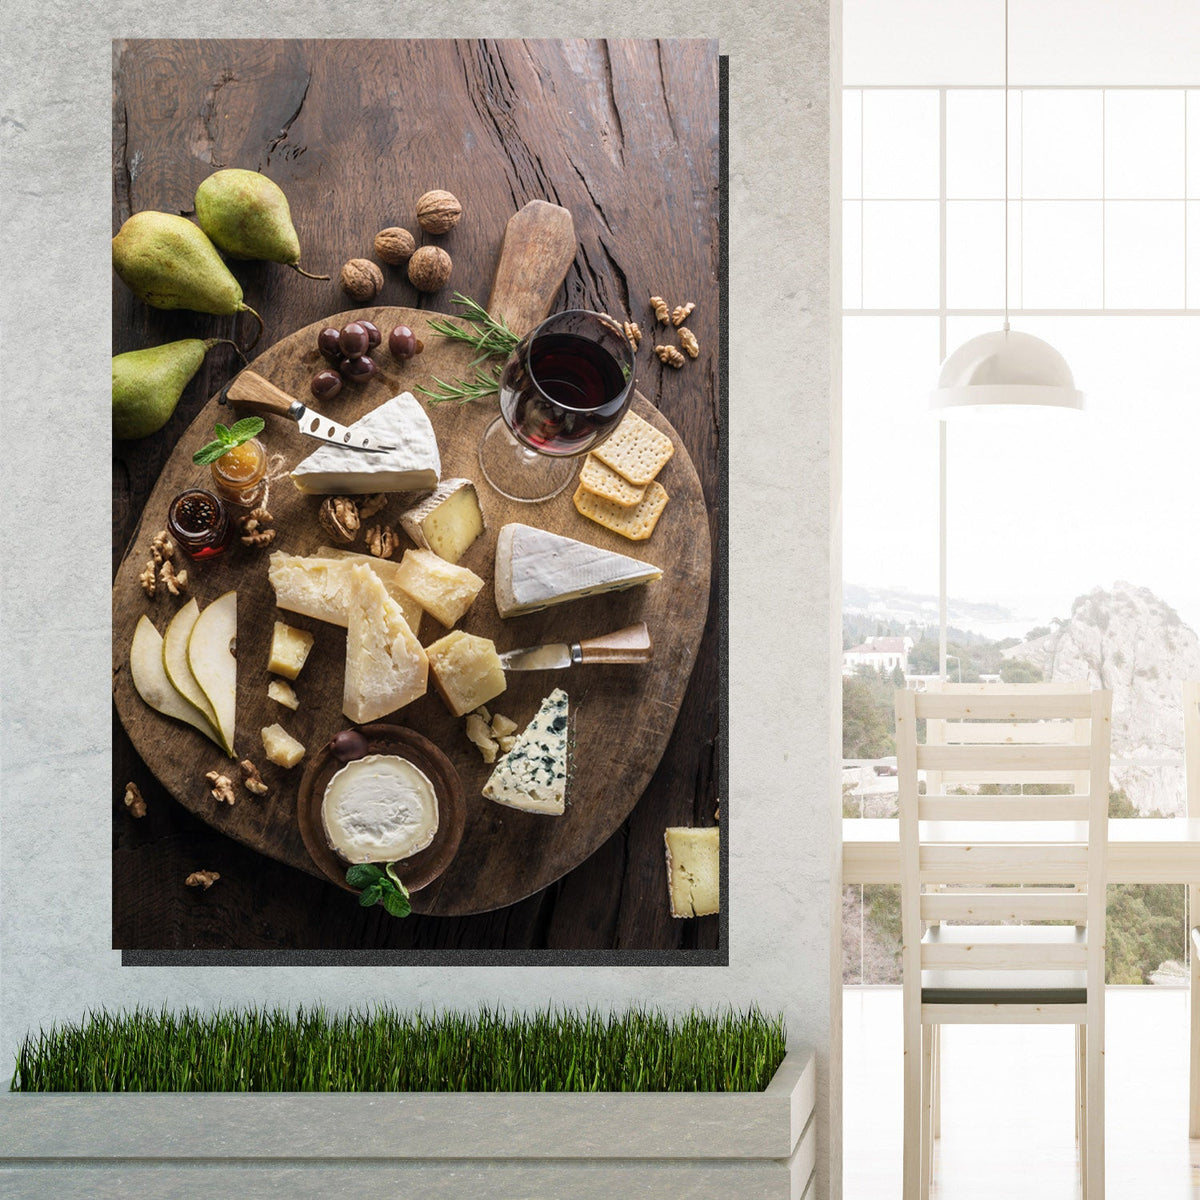 https://cdn.shopify.com/s/files/1/0387/9986/8044/products/FineWineandCheesePlatterCanvasArtprintStretched-2.jpg